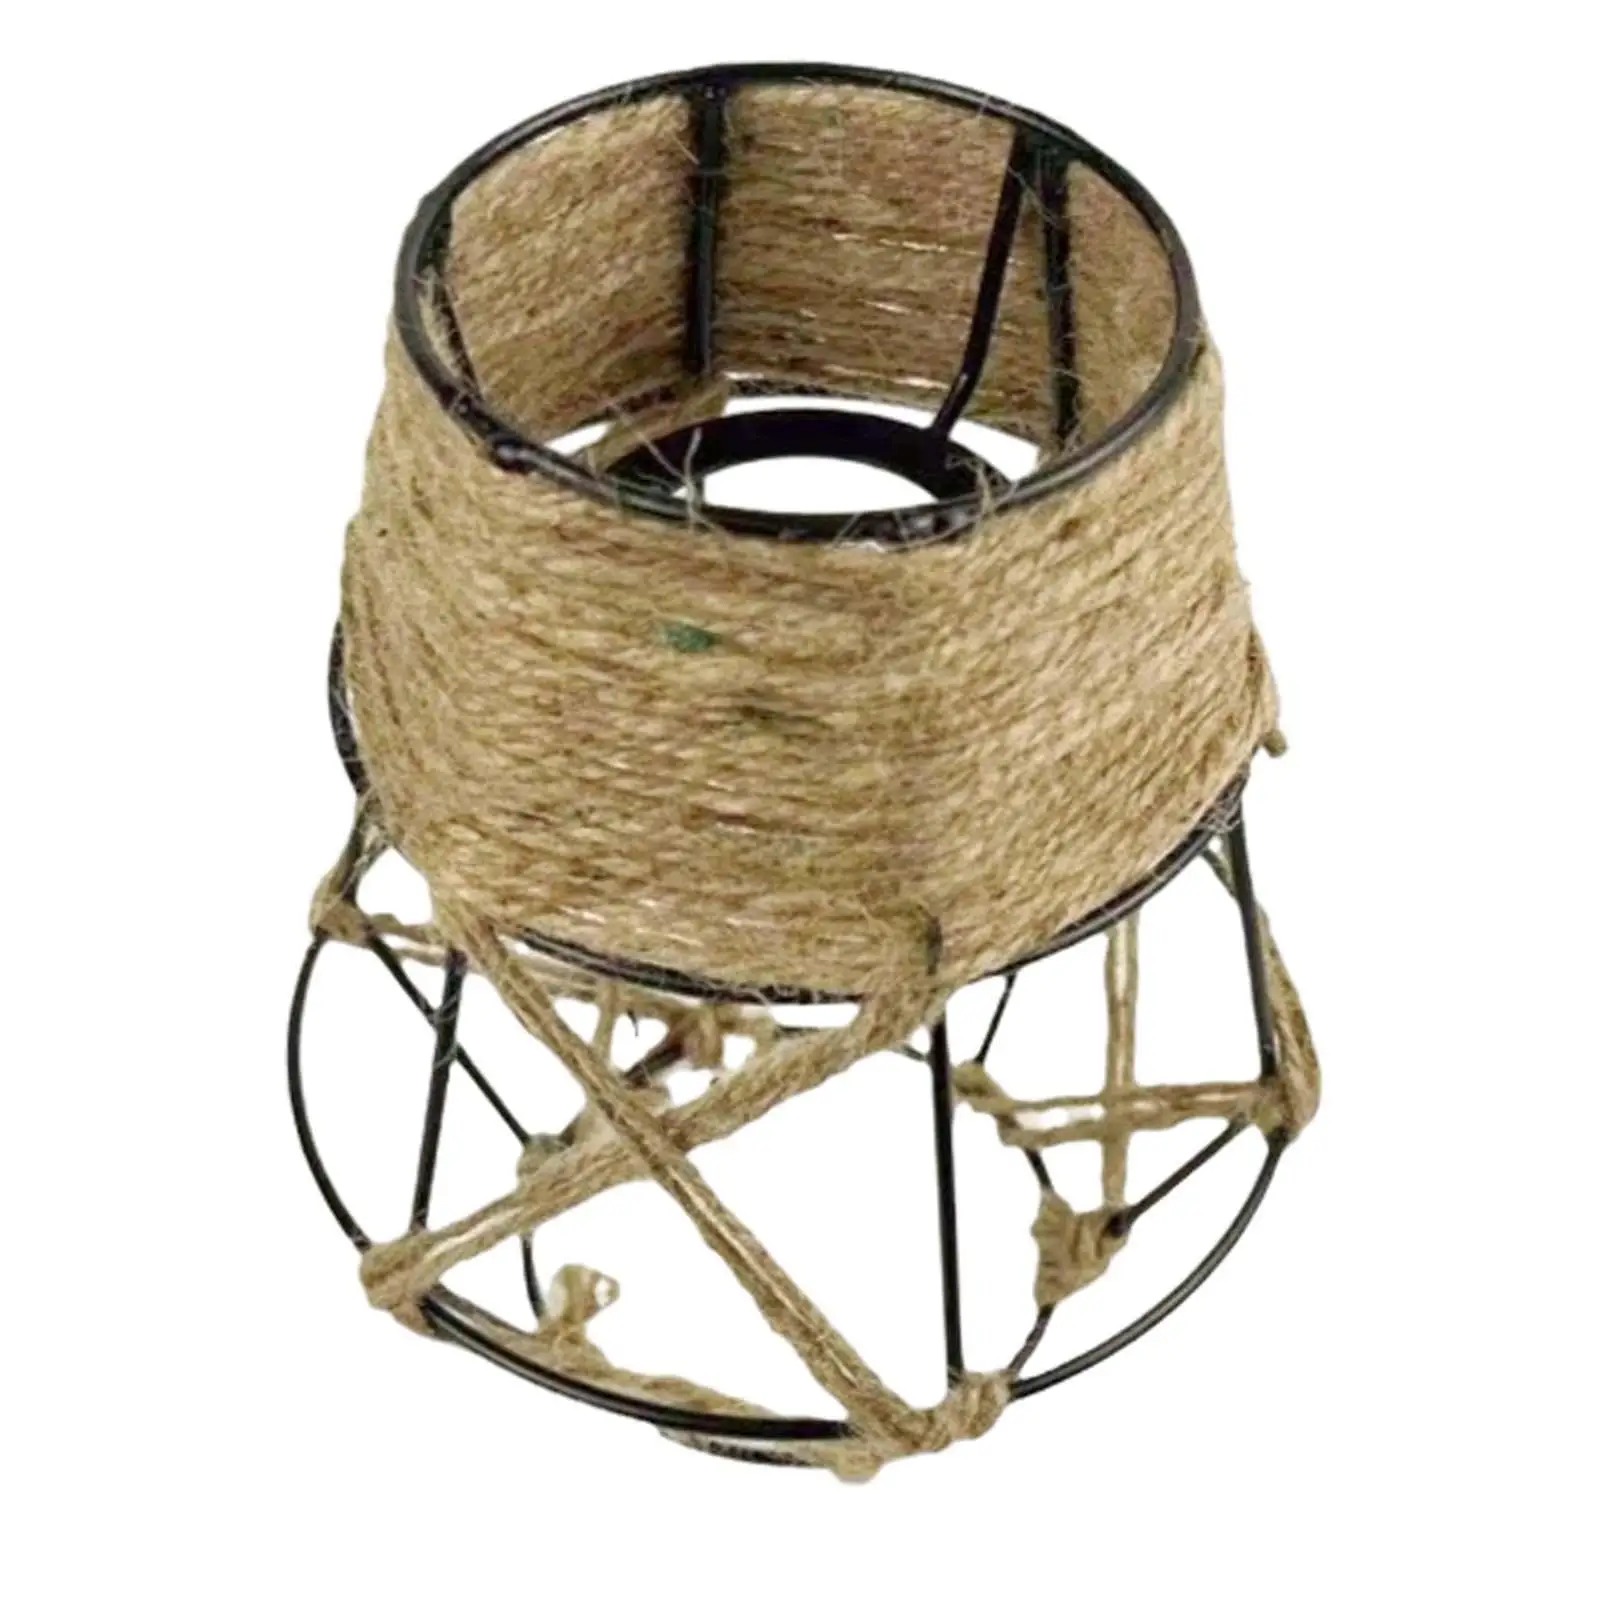 Ceiling Light Fixture Cover Decors Handwoven Rope Lampshade Pendant Lamp Shade for Club Hotel Lantern Kitchen Island Dining Room